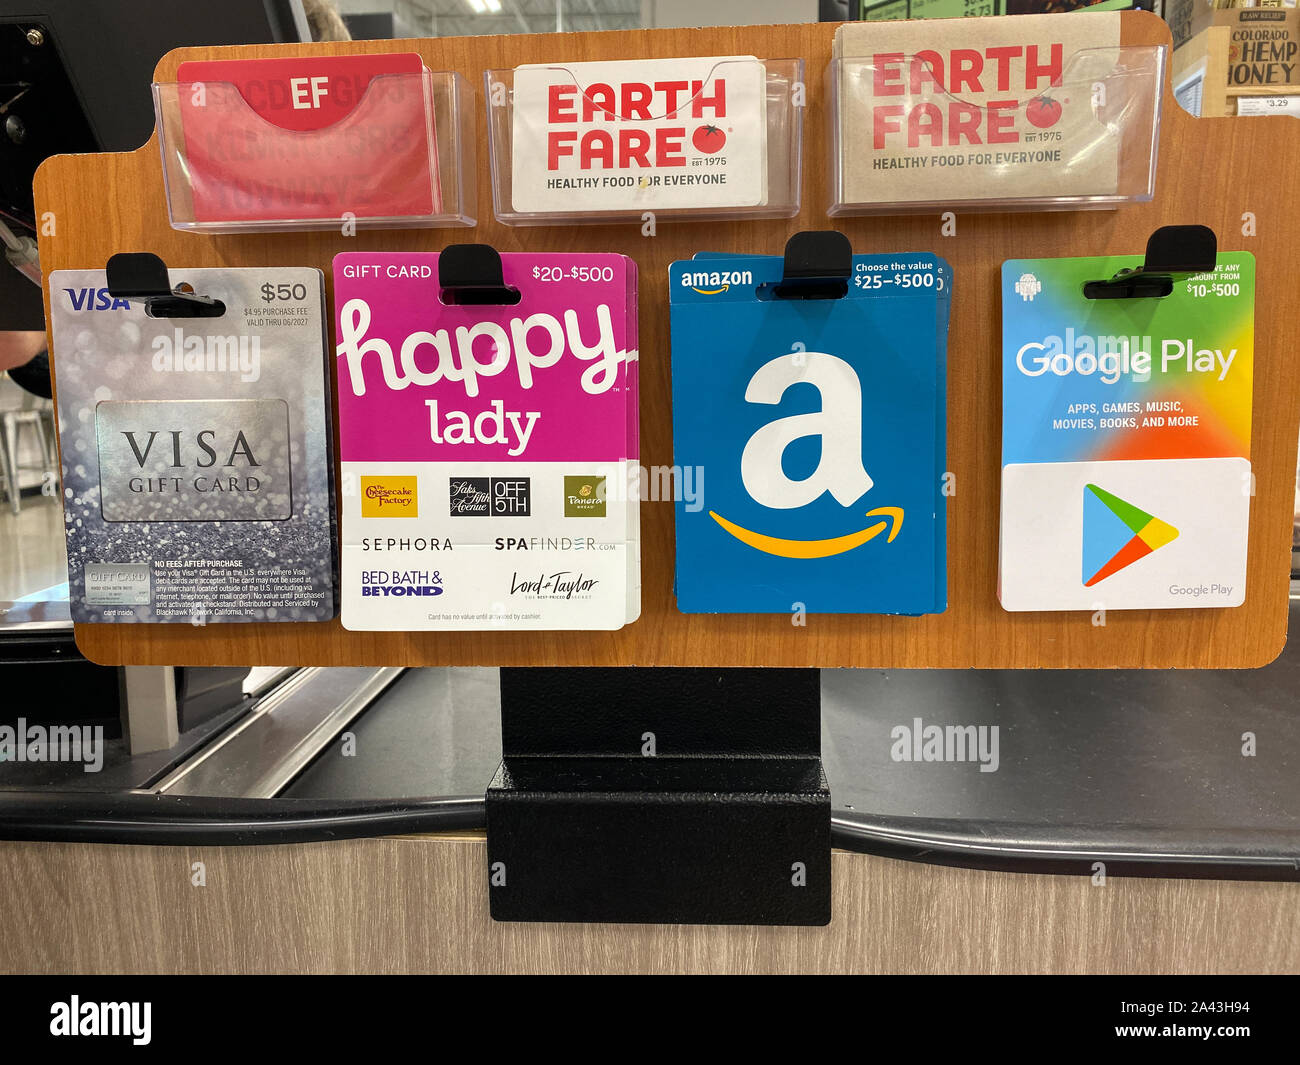 A New Survey Shows Americans Have Unspent Gift Cards Totaling $21B